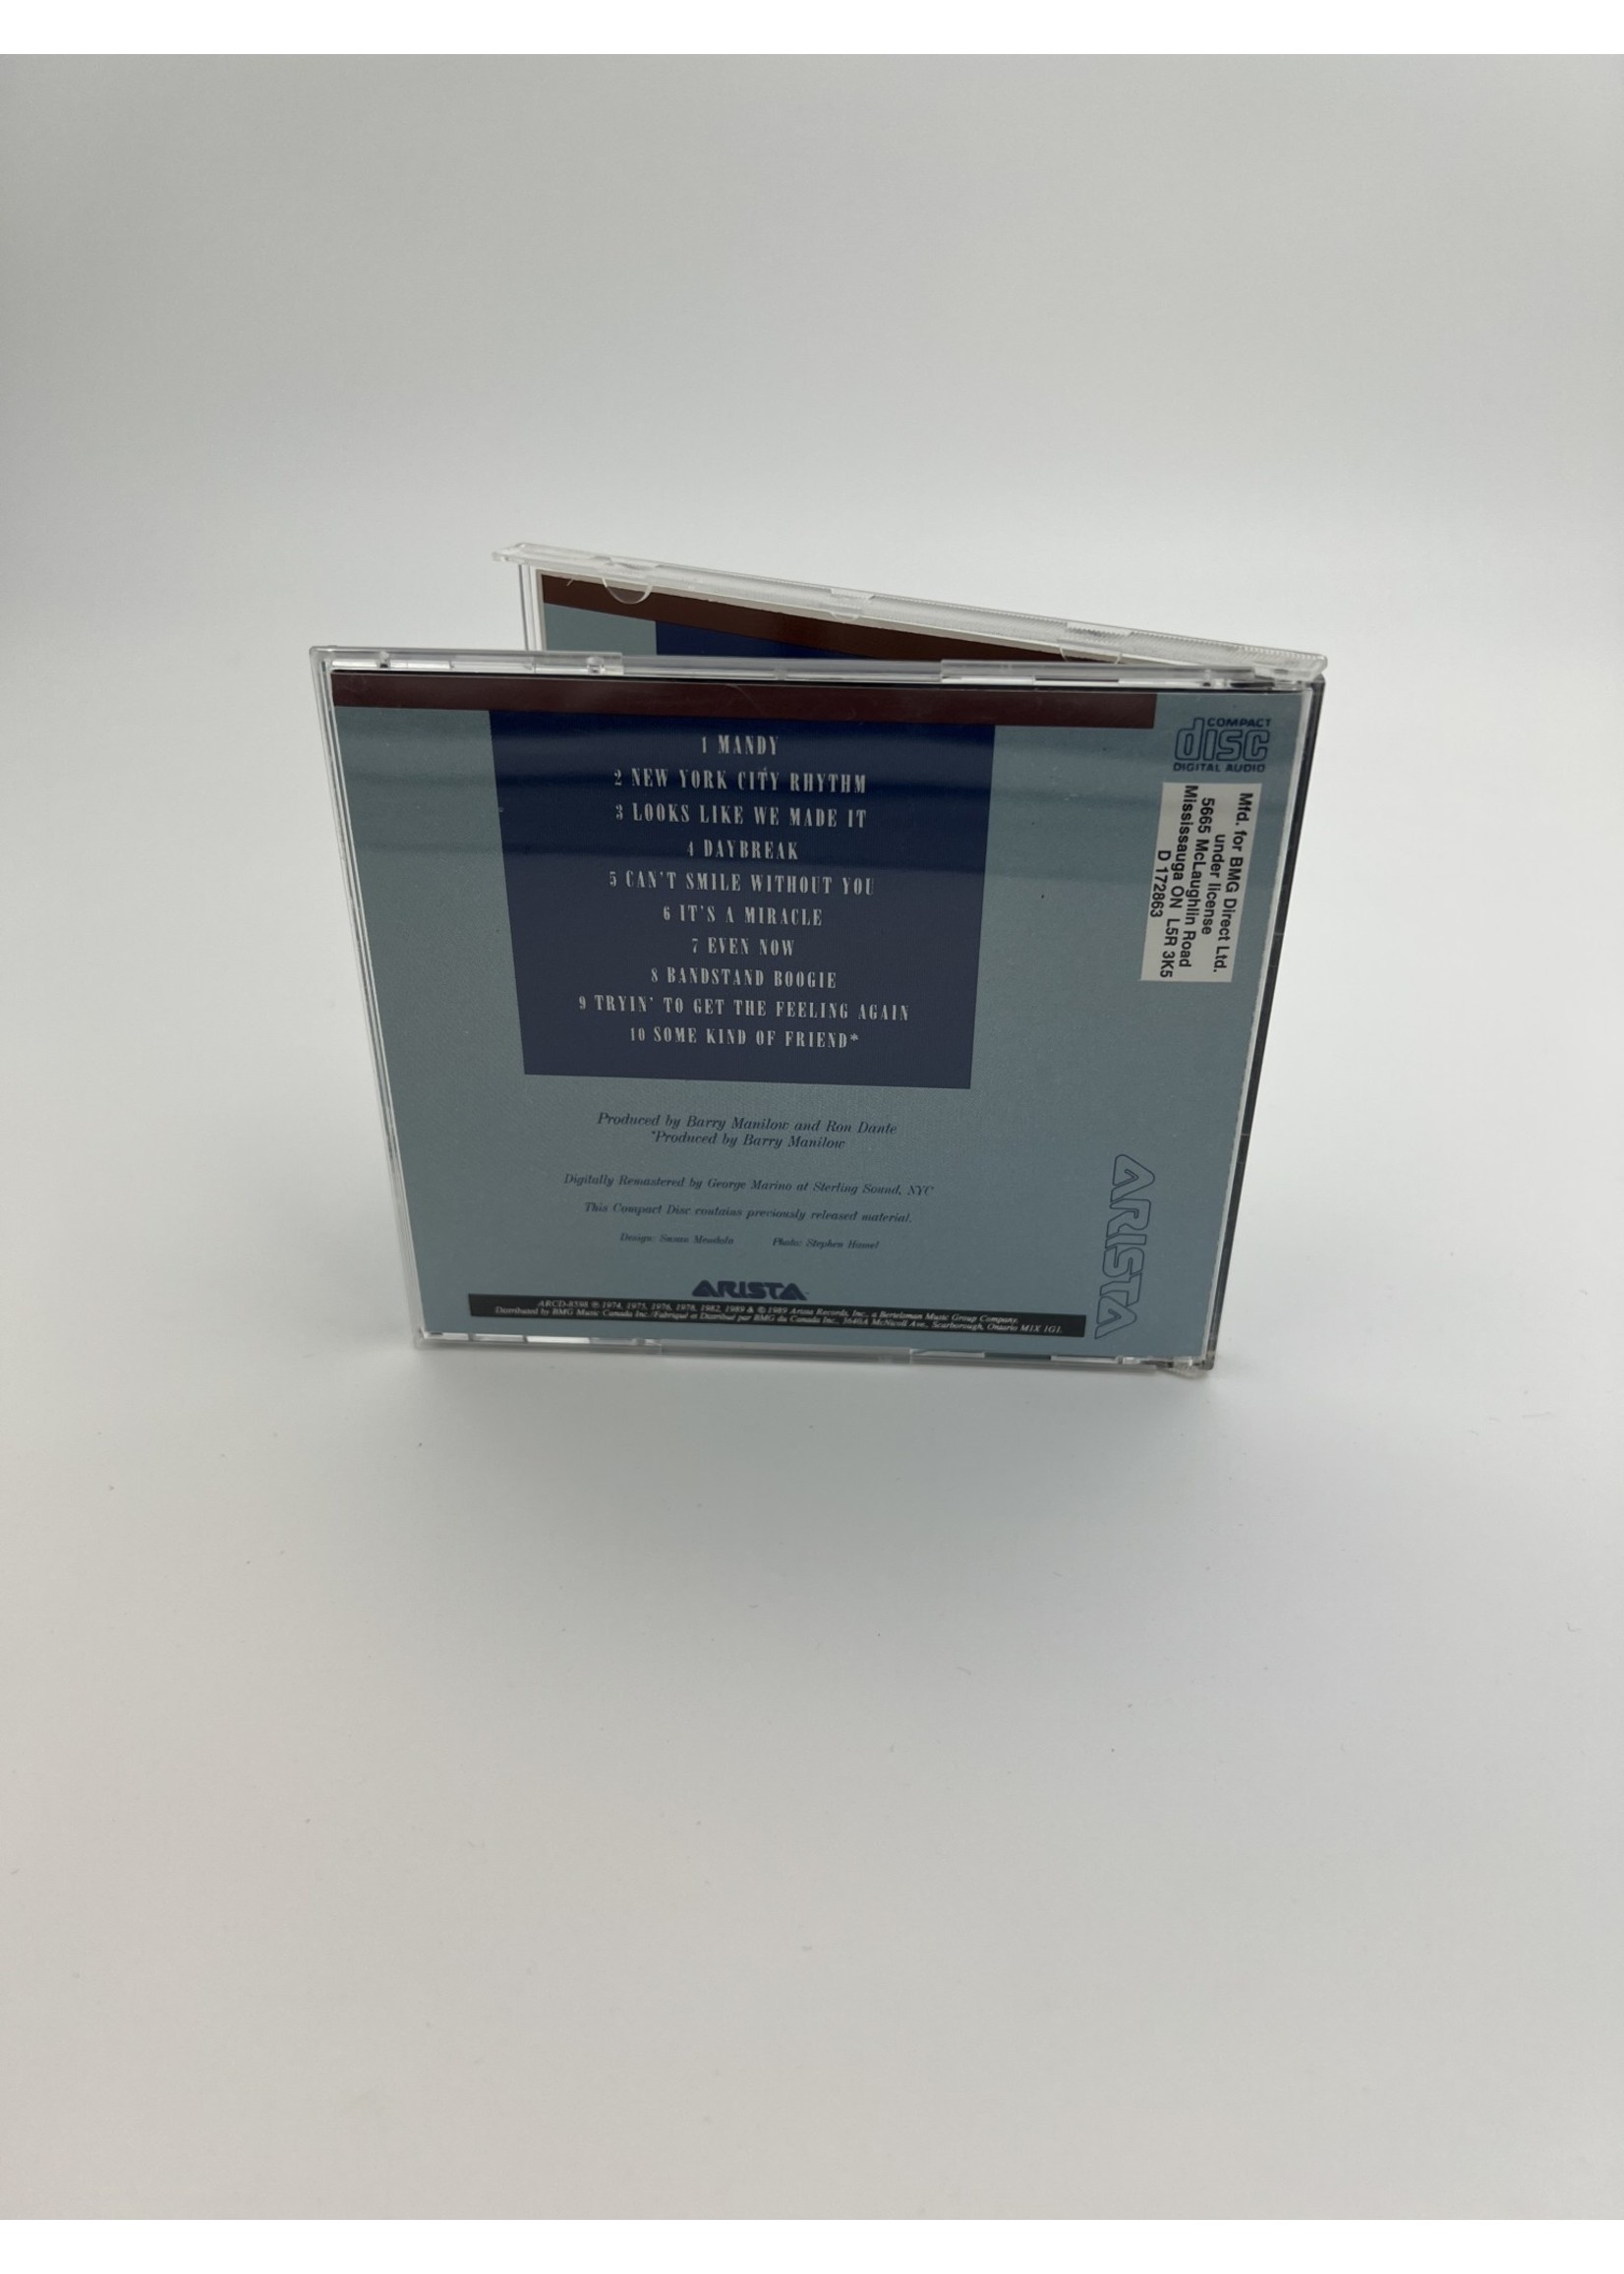 CD Barry Manilow Greatest Hits Volume 1 Cd